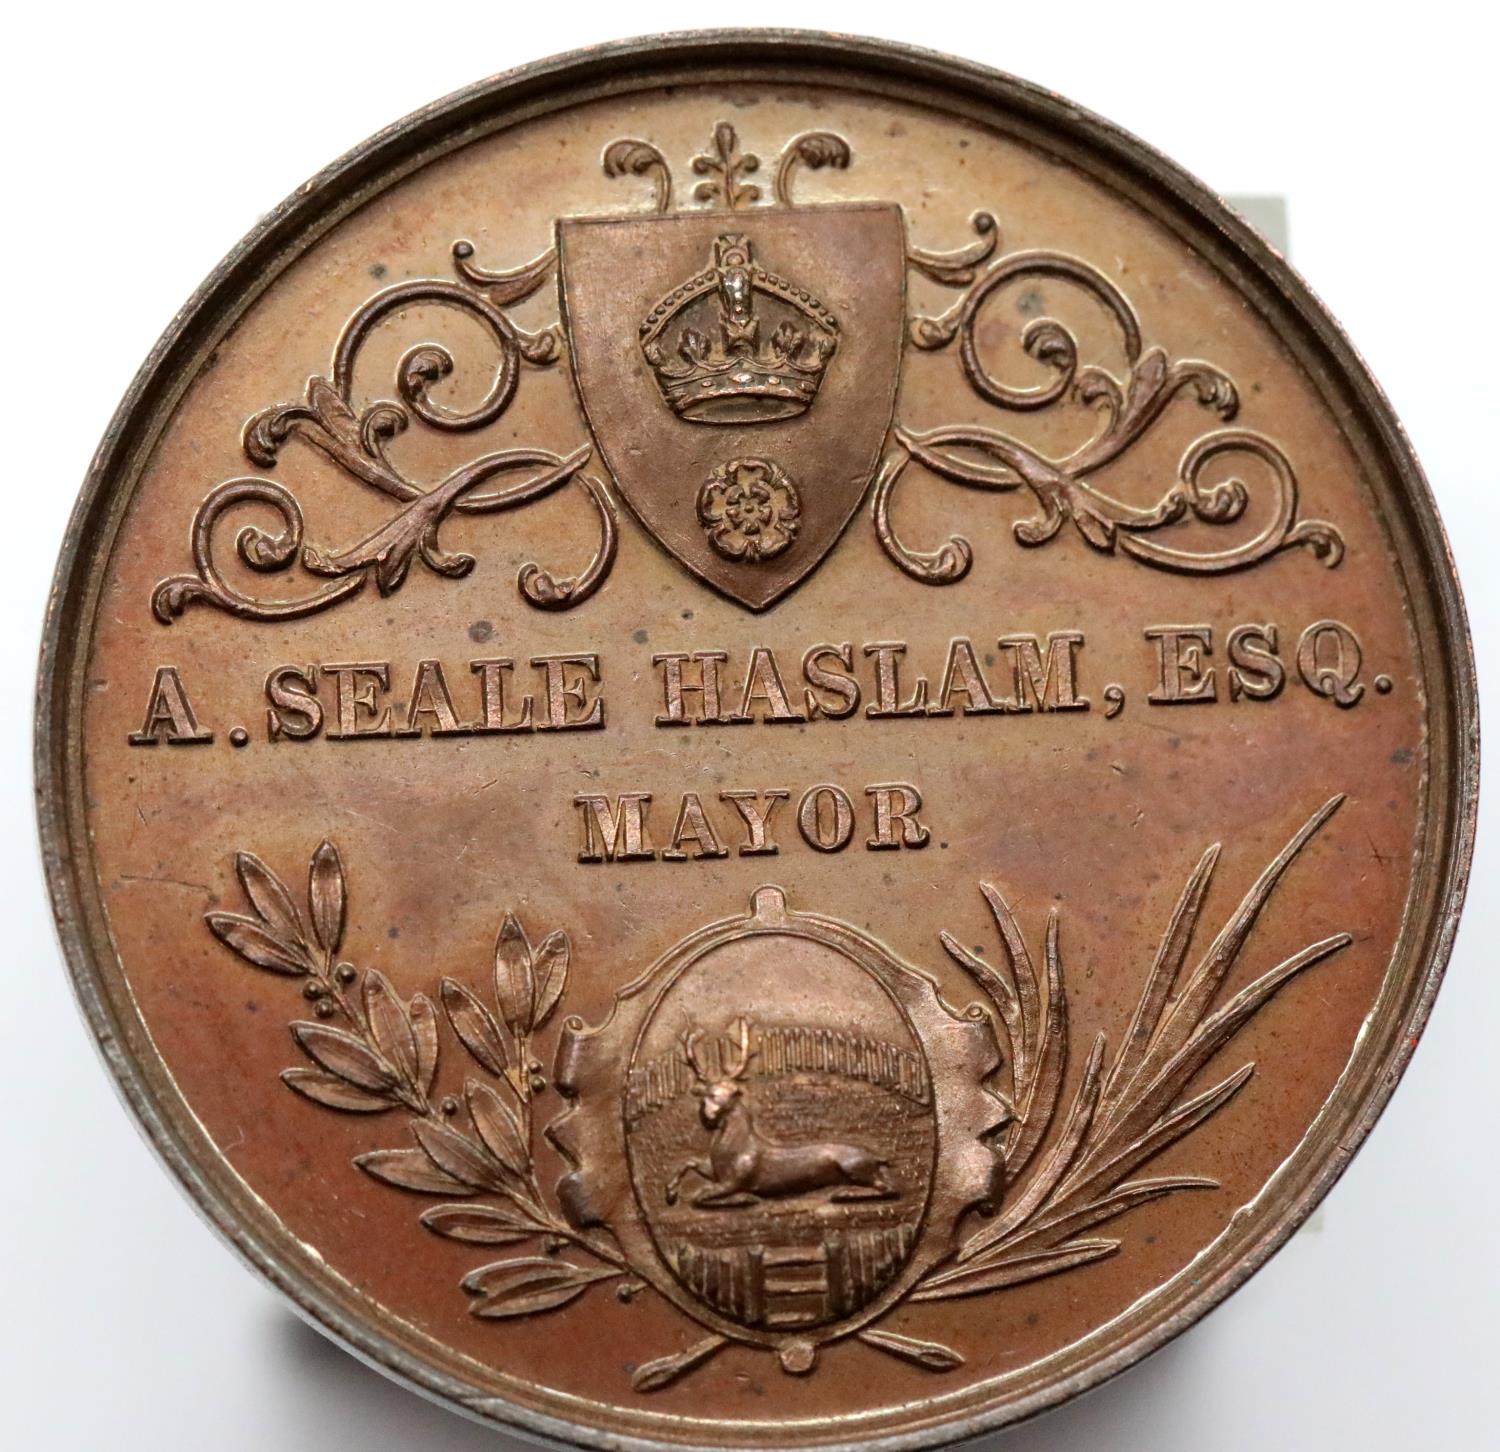 Queen Victoria medallion - Derbyshire Infirmary laying of foundation stone 1891. P&P Group 1 (£14+